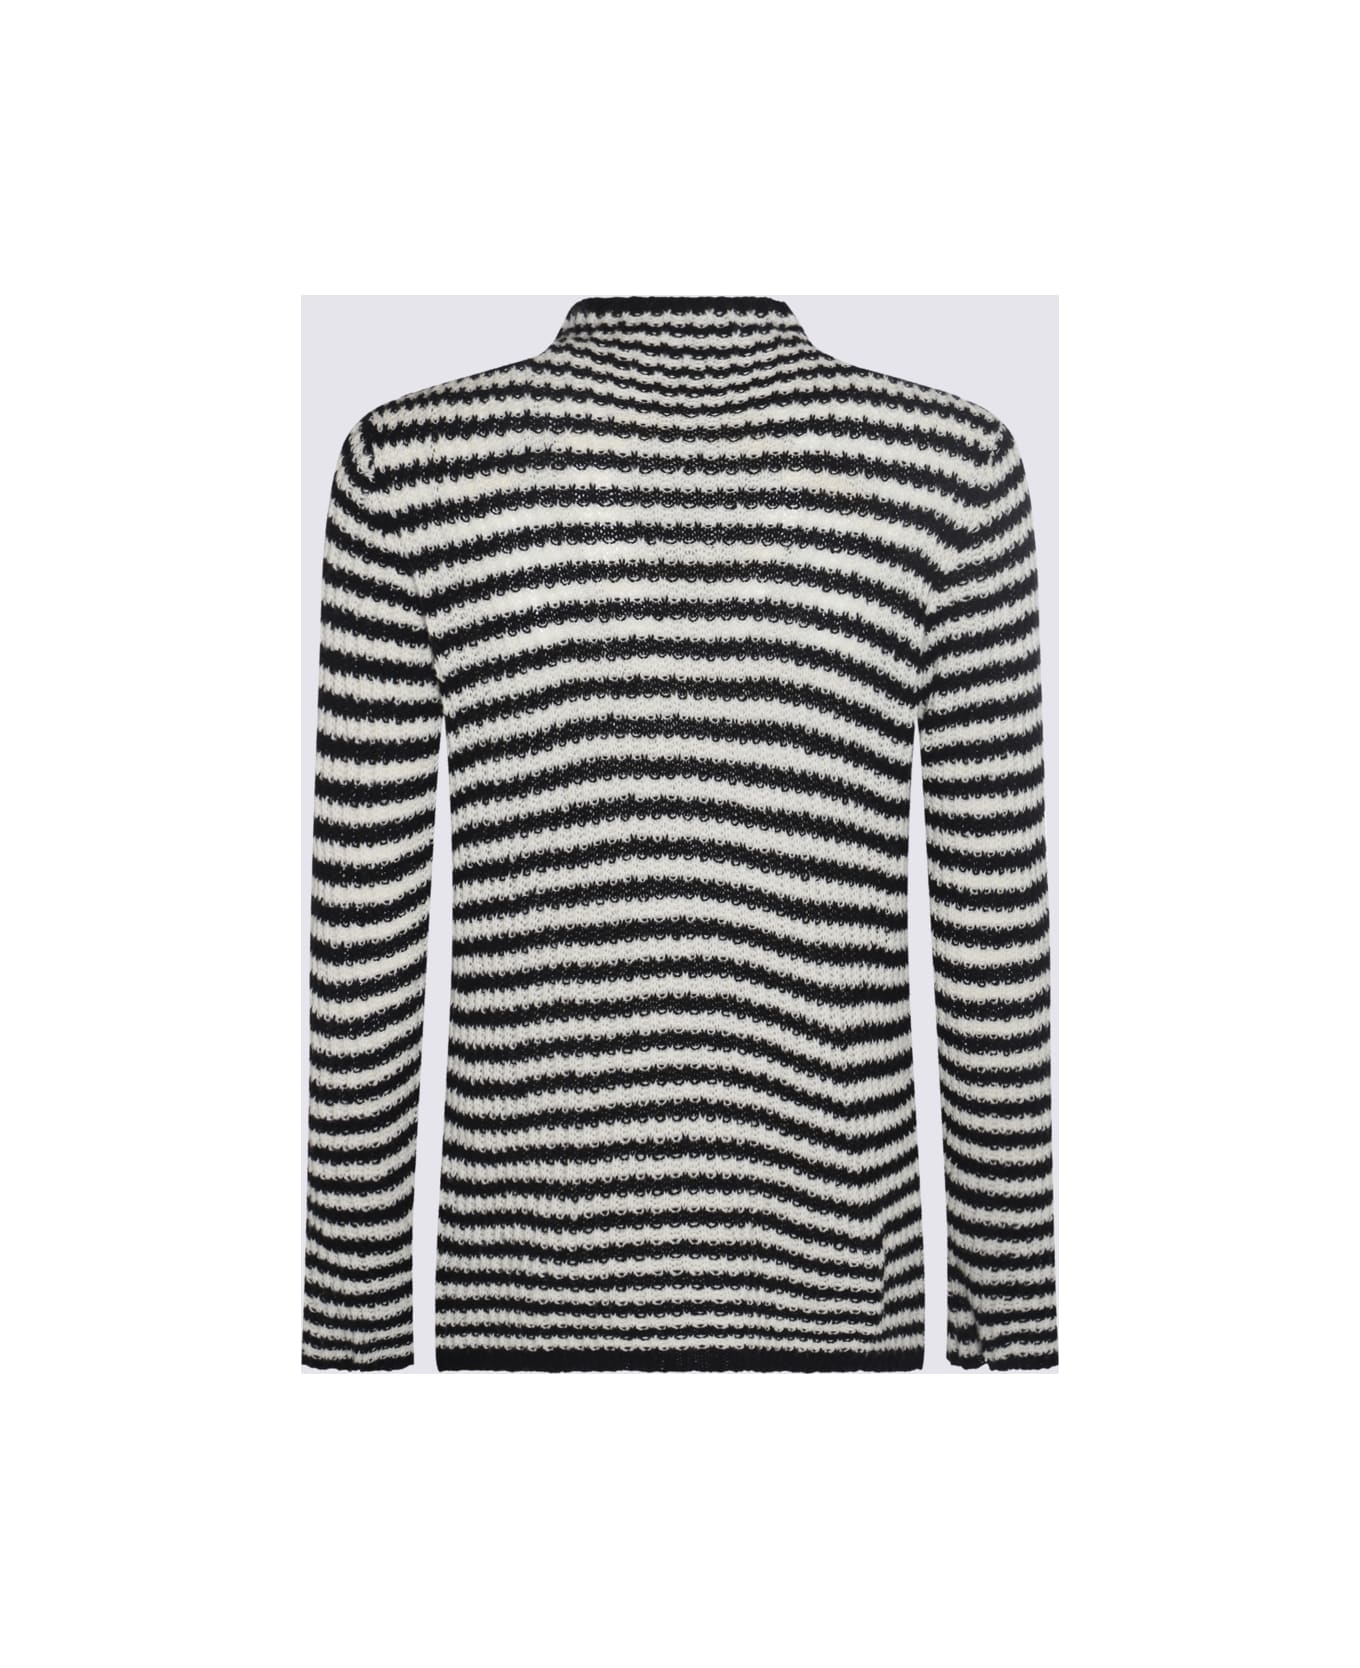 Dries Van Noten White And Black Wool And Cashmere Sweater - White